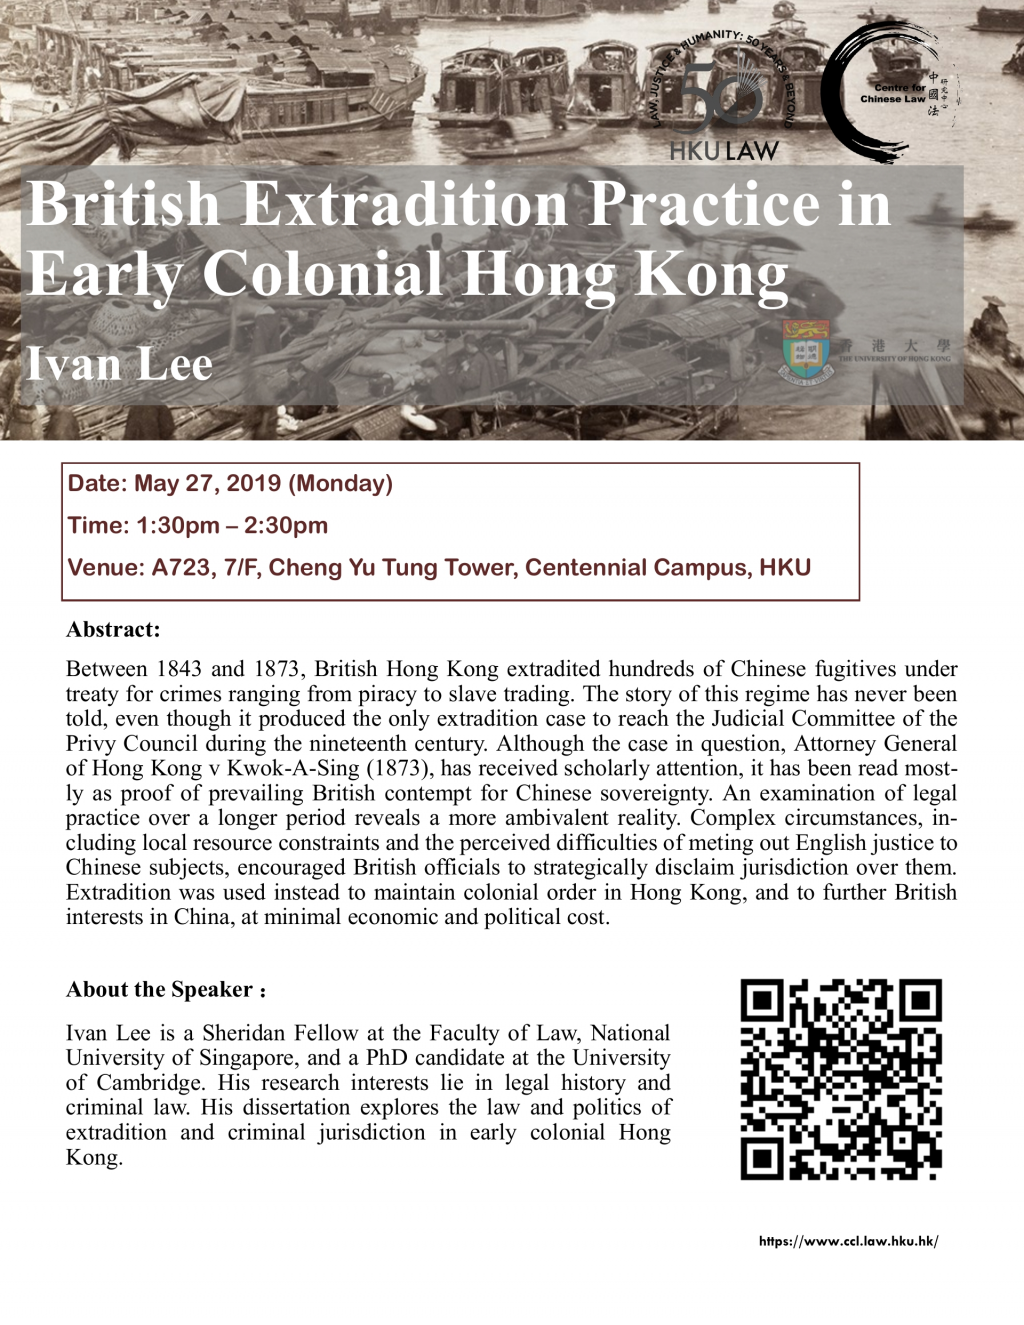 British Extradition Practice in Early Colonial Hong Kong